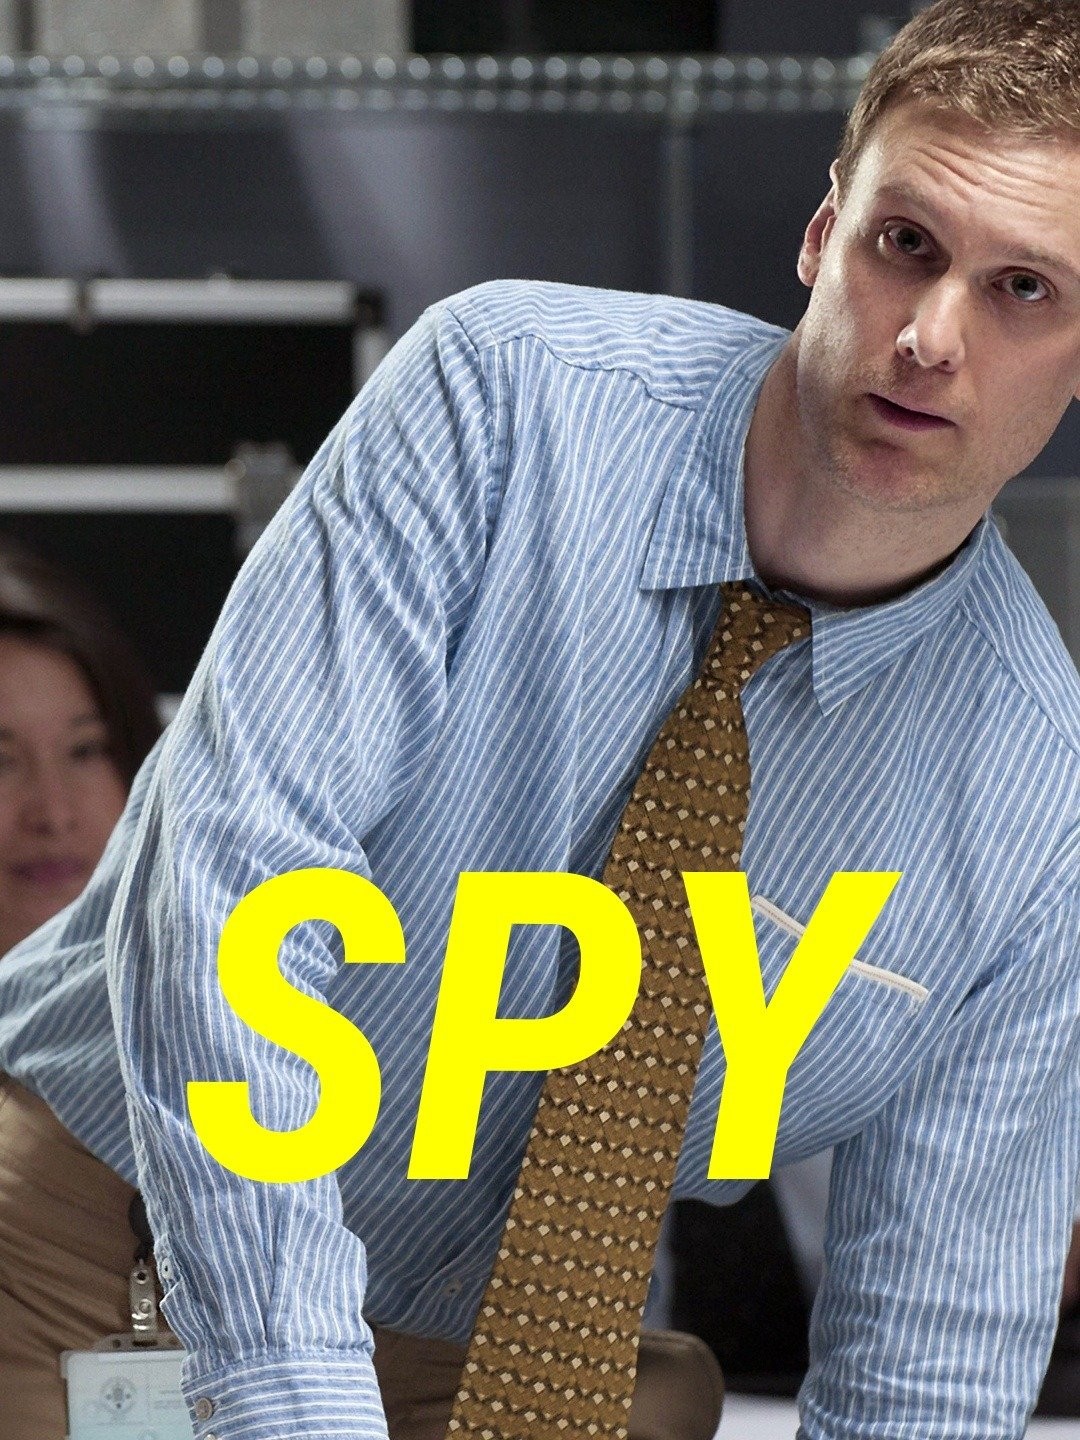 The Spy - Rotten Tomatoes